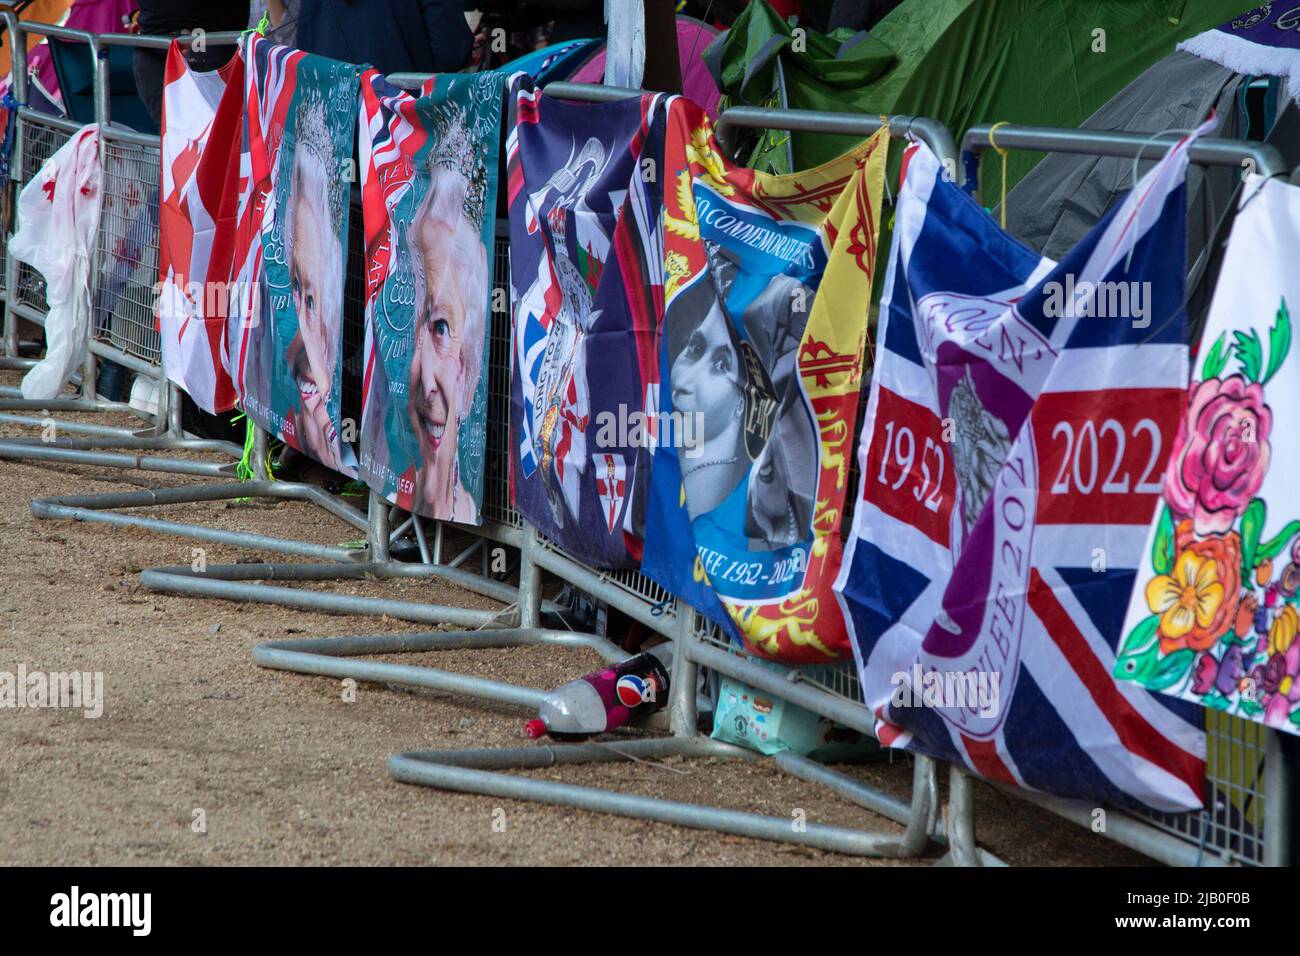 London, UK. Ist June 2022. Barriers have been decorated with flags as Royal fans have come to the Mall to save a prime spot for tomorrow's Platinum Jubilee event to celebrate Queen Elizabeth II's 70 years on the throne. Credit: Kiki Streitberger / Alamy Live News Stock Photo